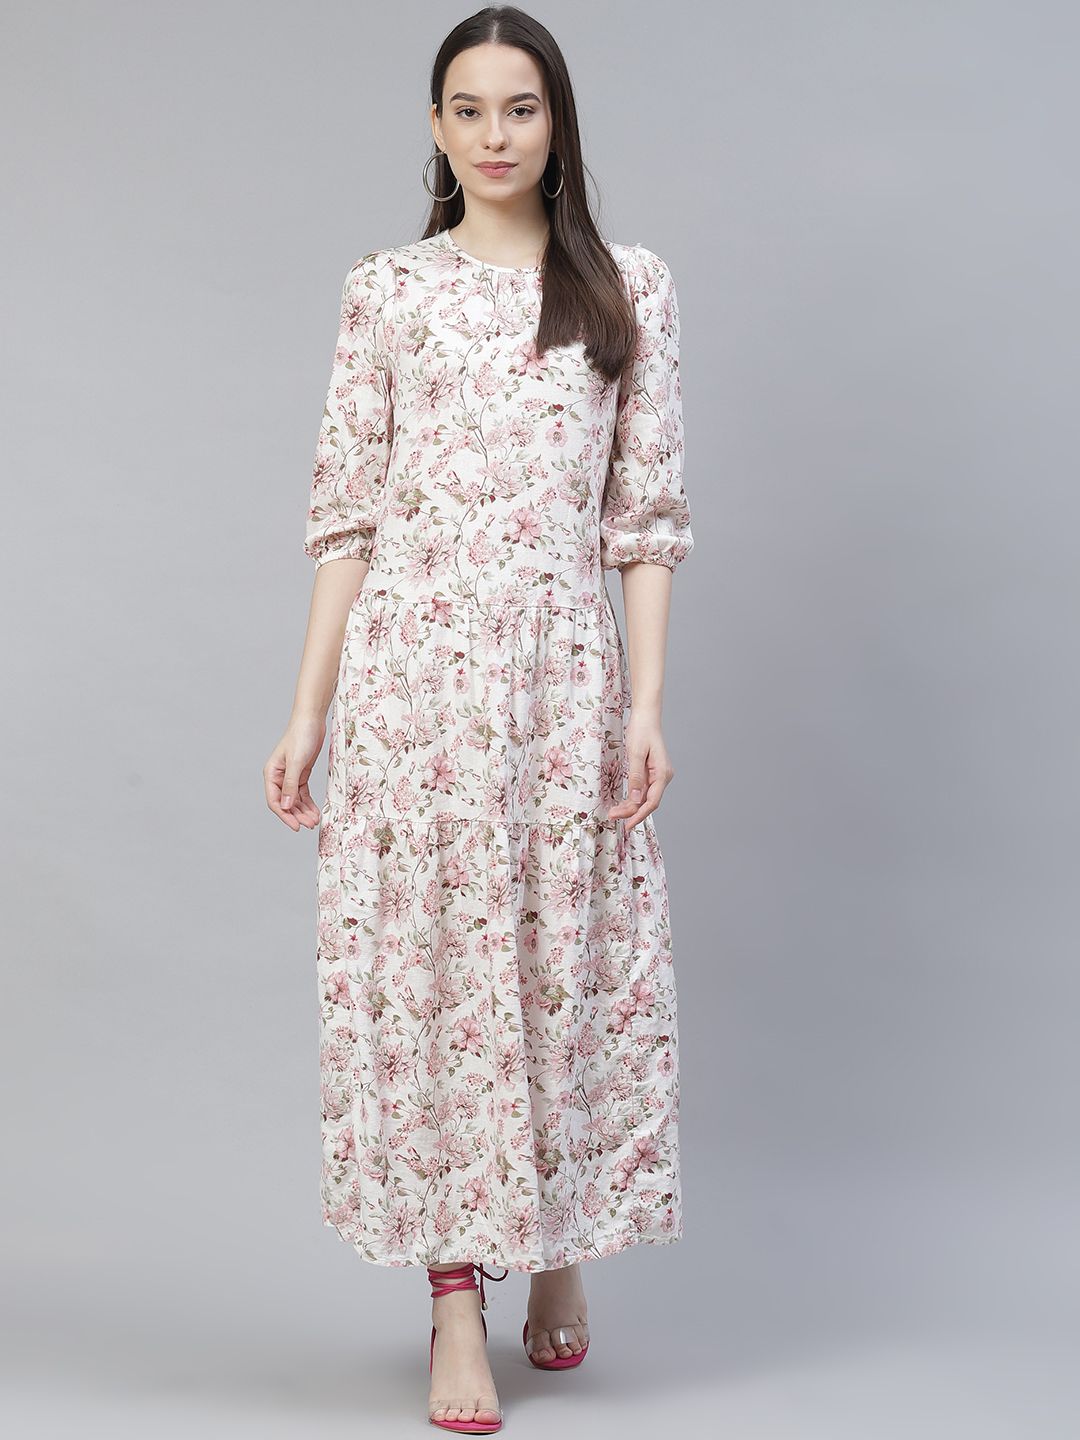 Marks & Spencer Women Off-White Floral Printed Maxi Dress Price in India